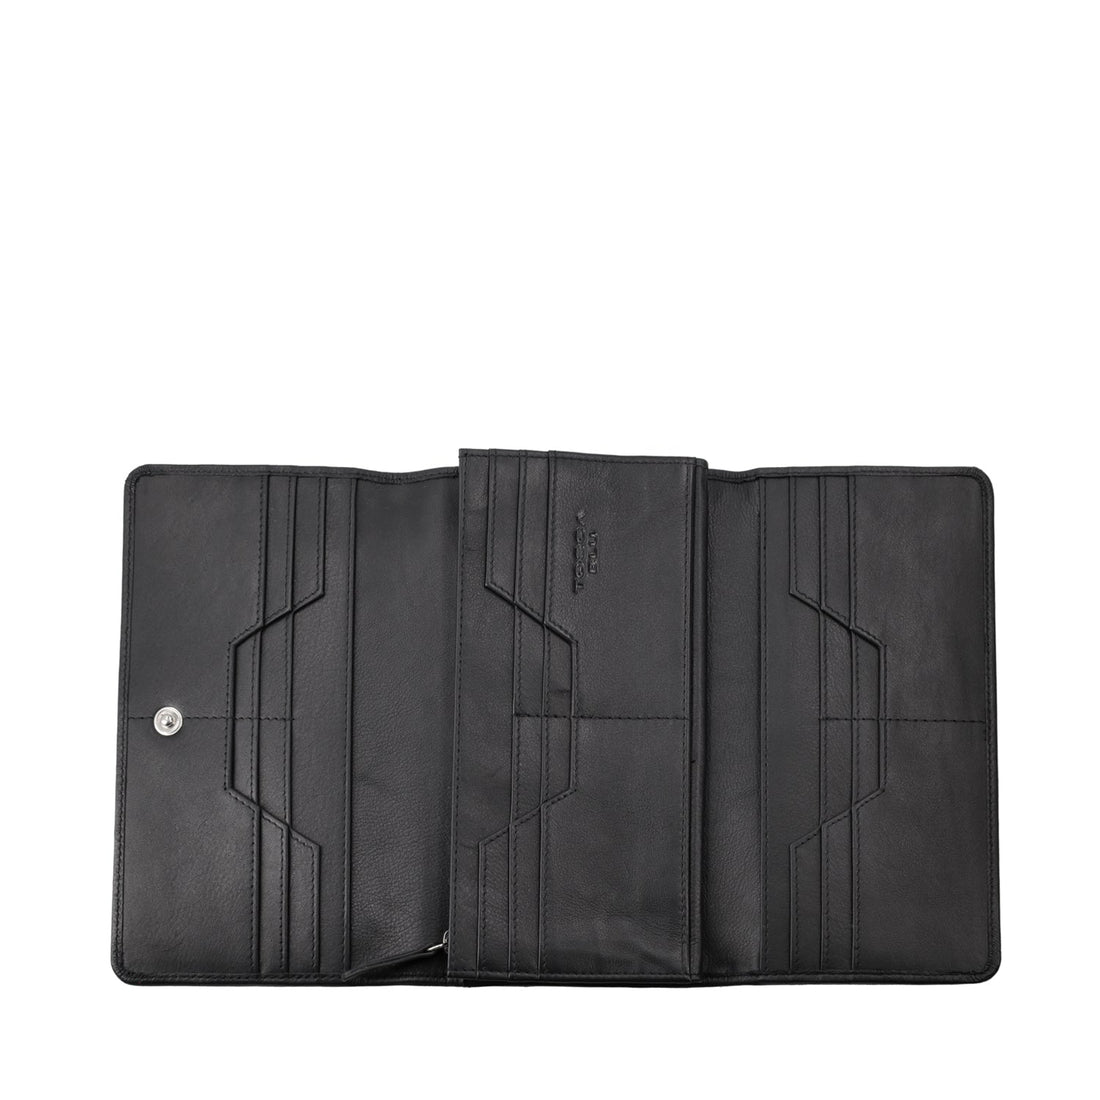 BLACK LARGE BASIC WALLETS WALLET WITH FLAP